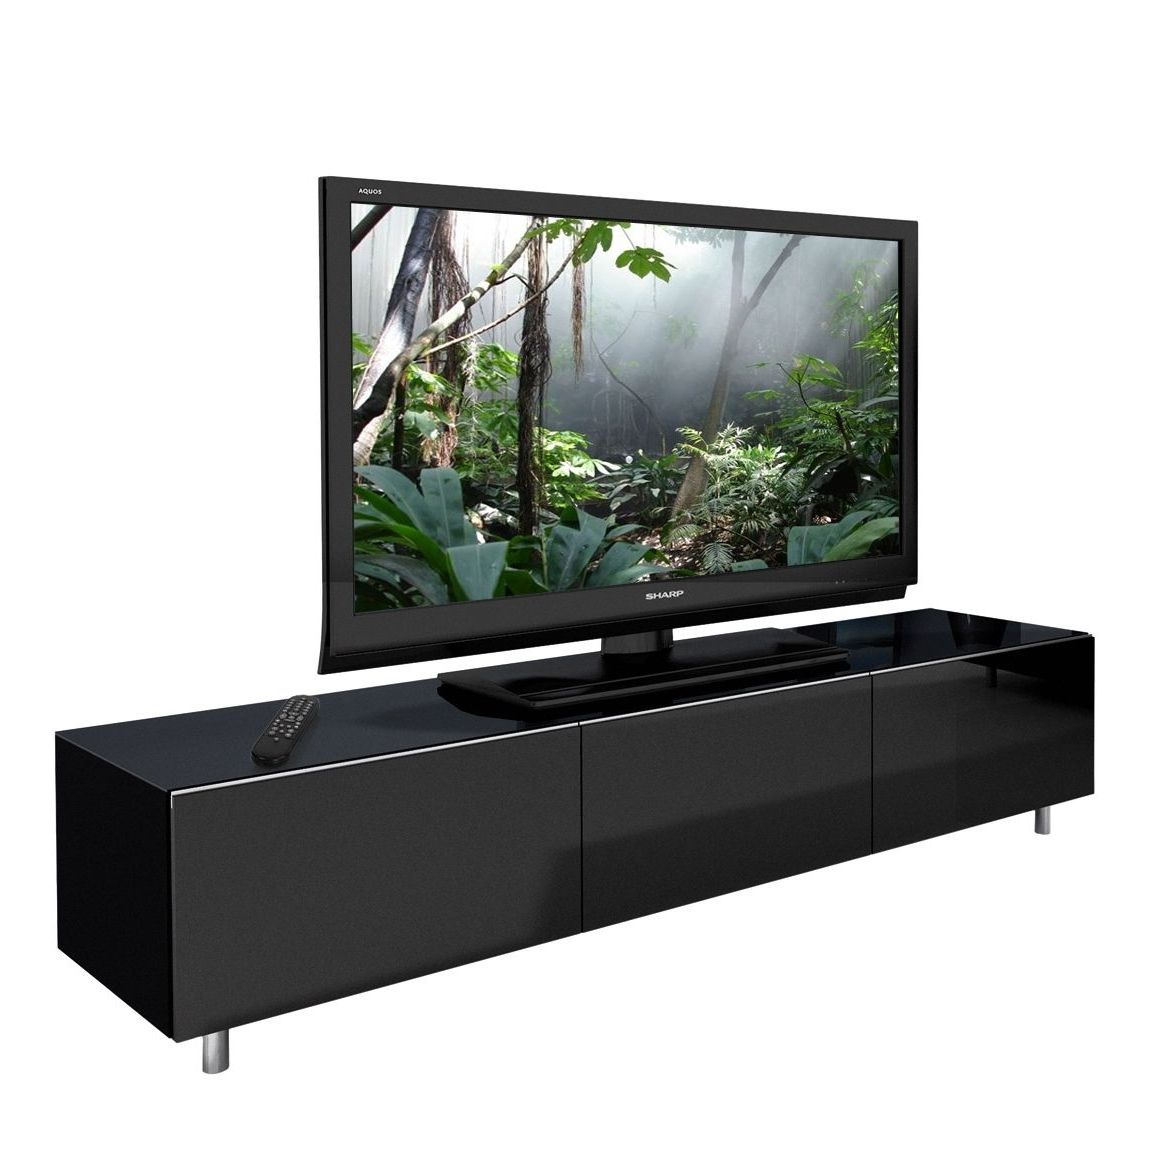 2018 Black Gloss Tv Stands For Long Black Gloss Tv Unit (View 5 of 20)